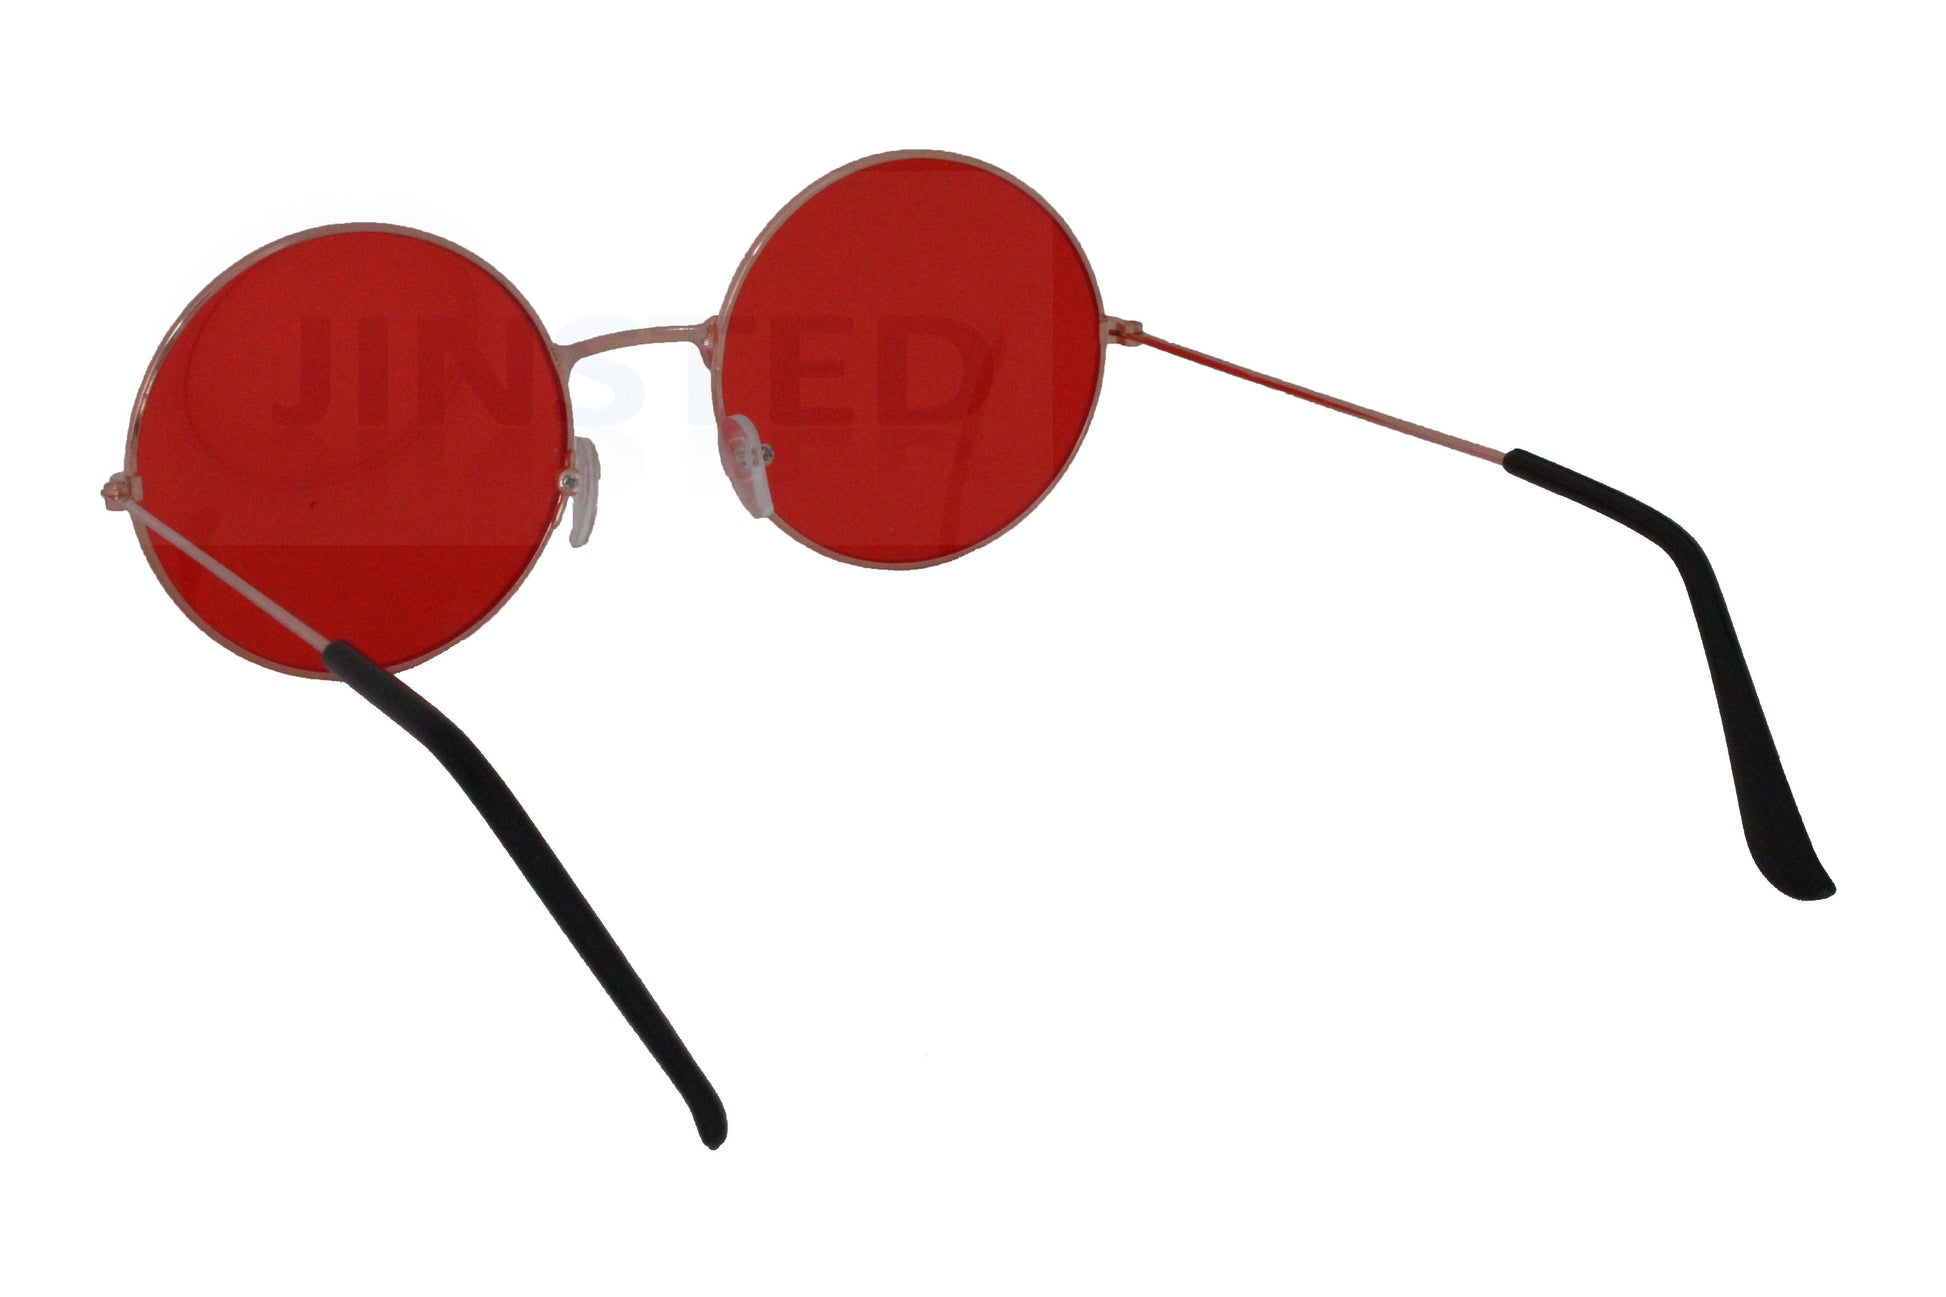 Red Tinted Teashades Sunglasses with Gold Round Frame - Jinsted